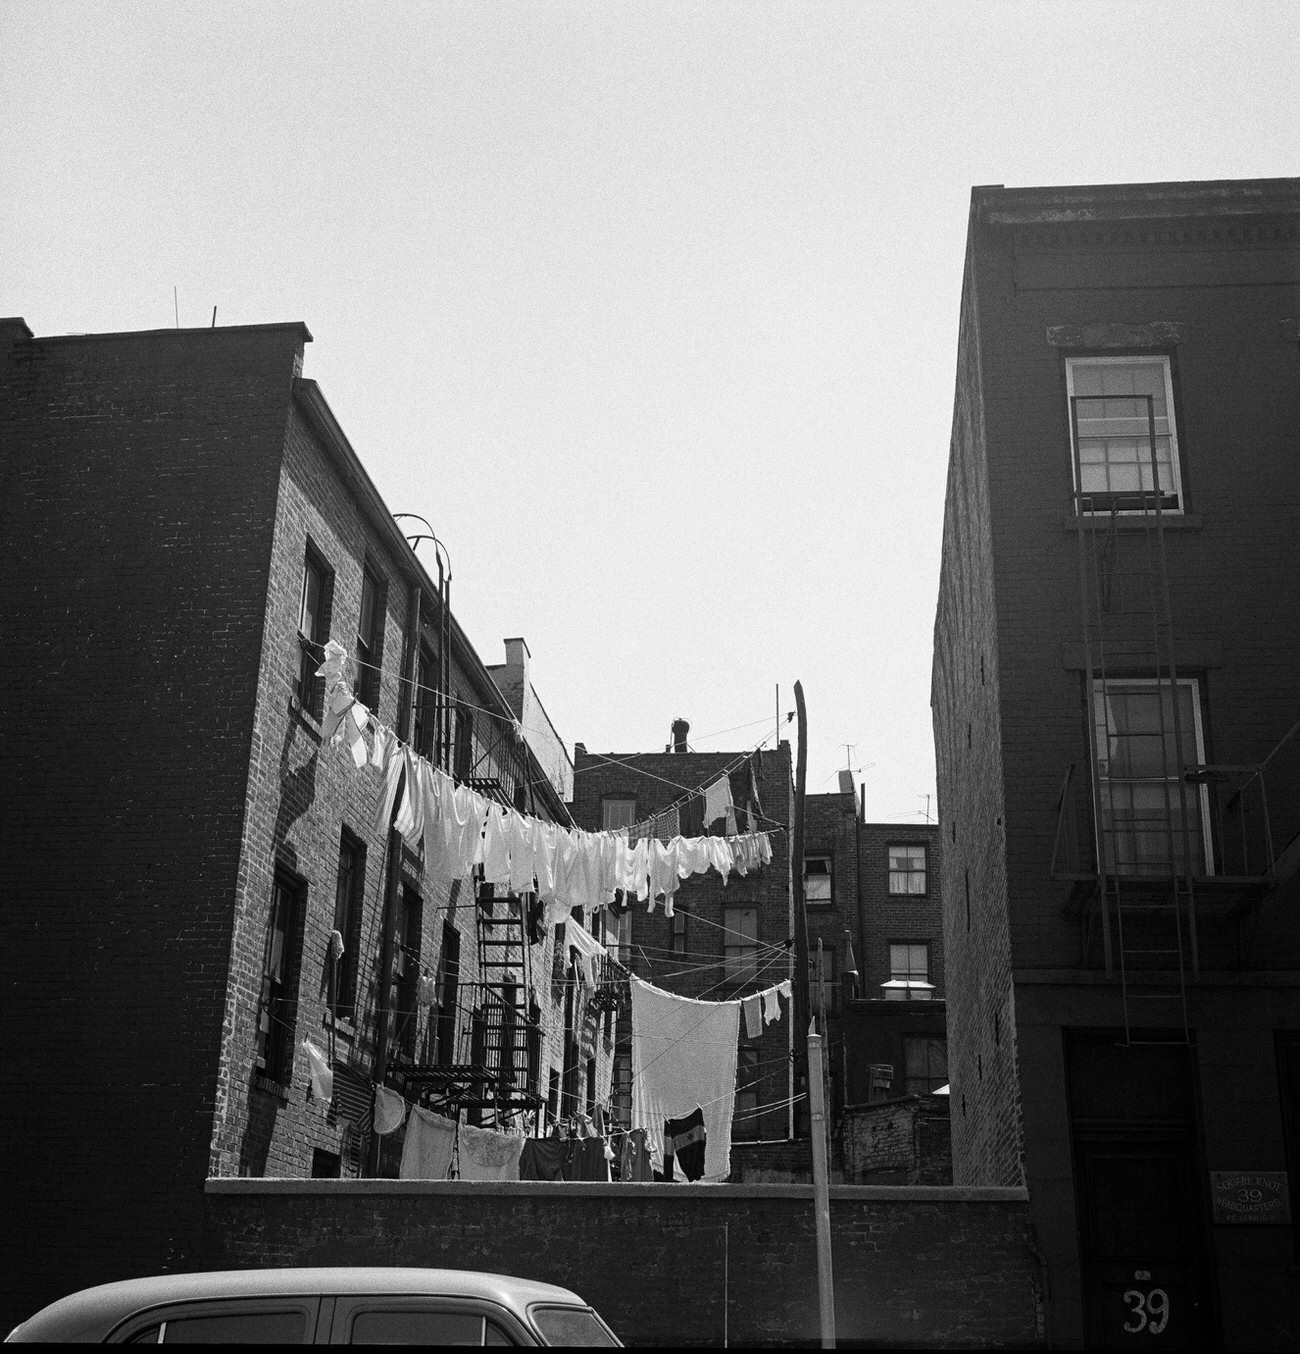 Clothes Hanging On A Clothesline Next To P.c. Herwig Co. In Brooklyn Heights, 1958.